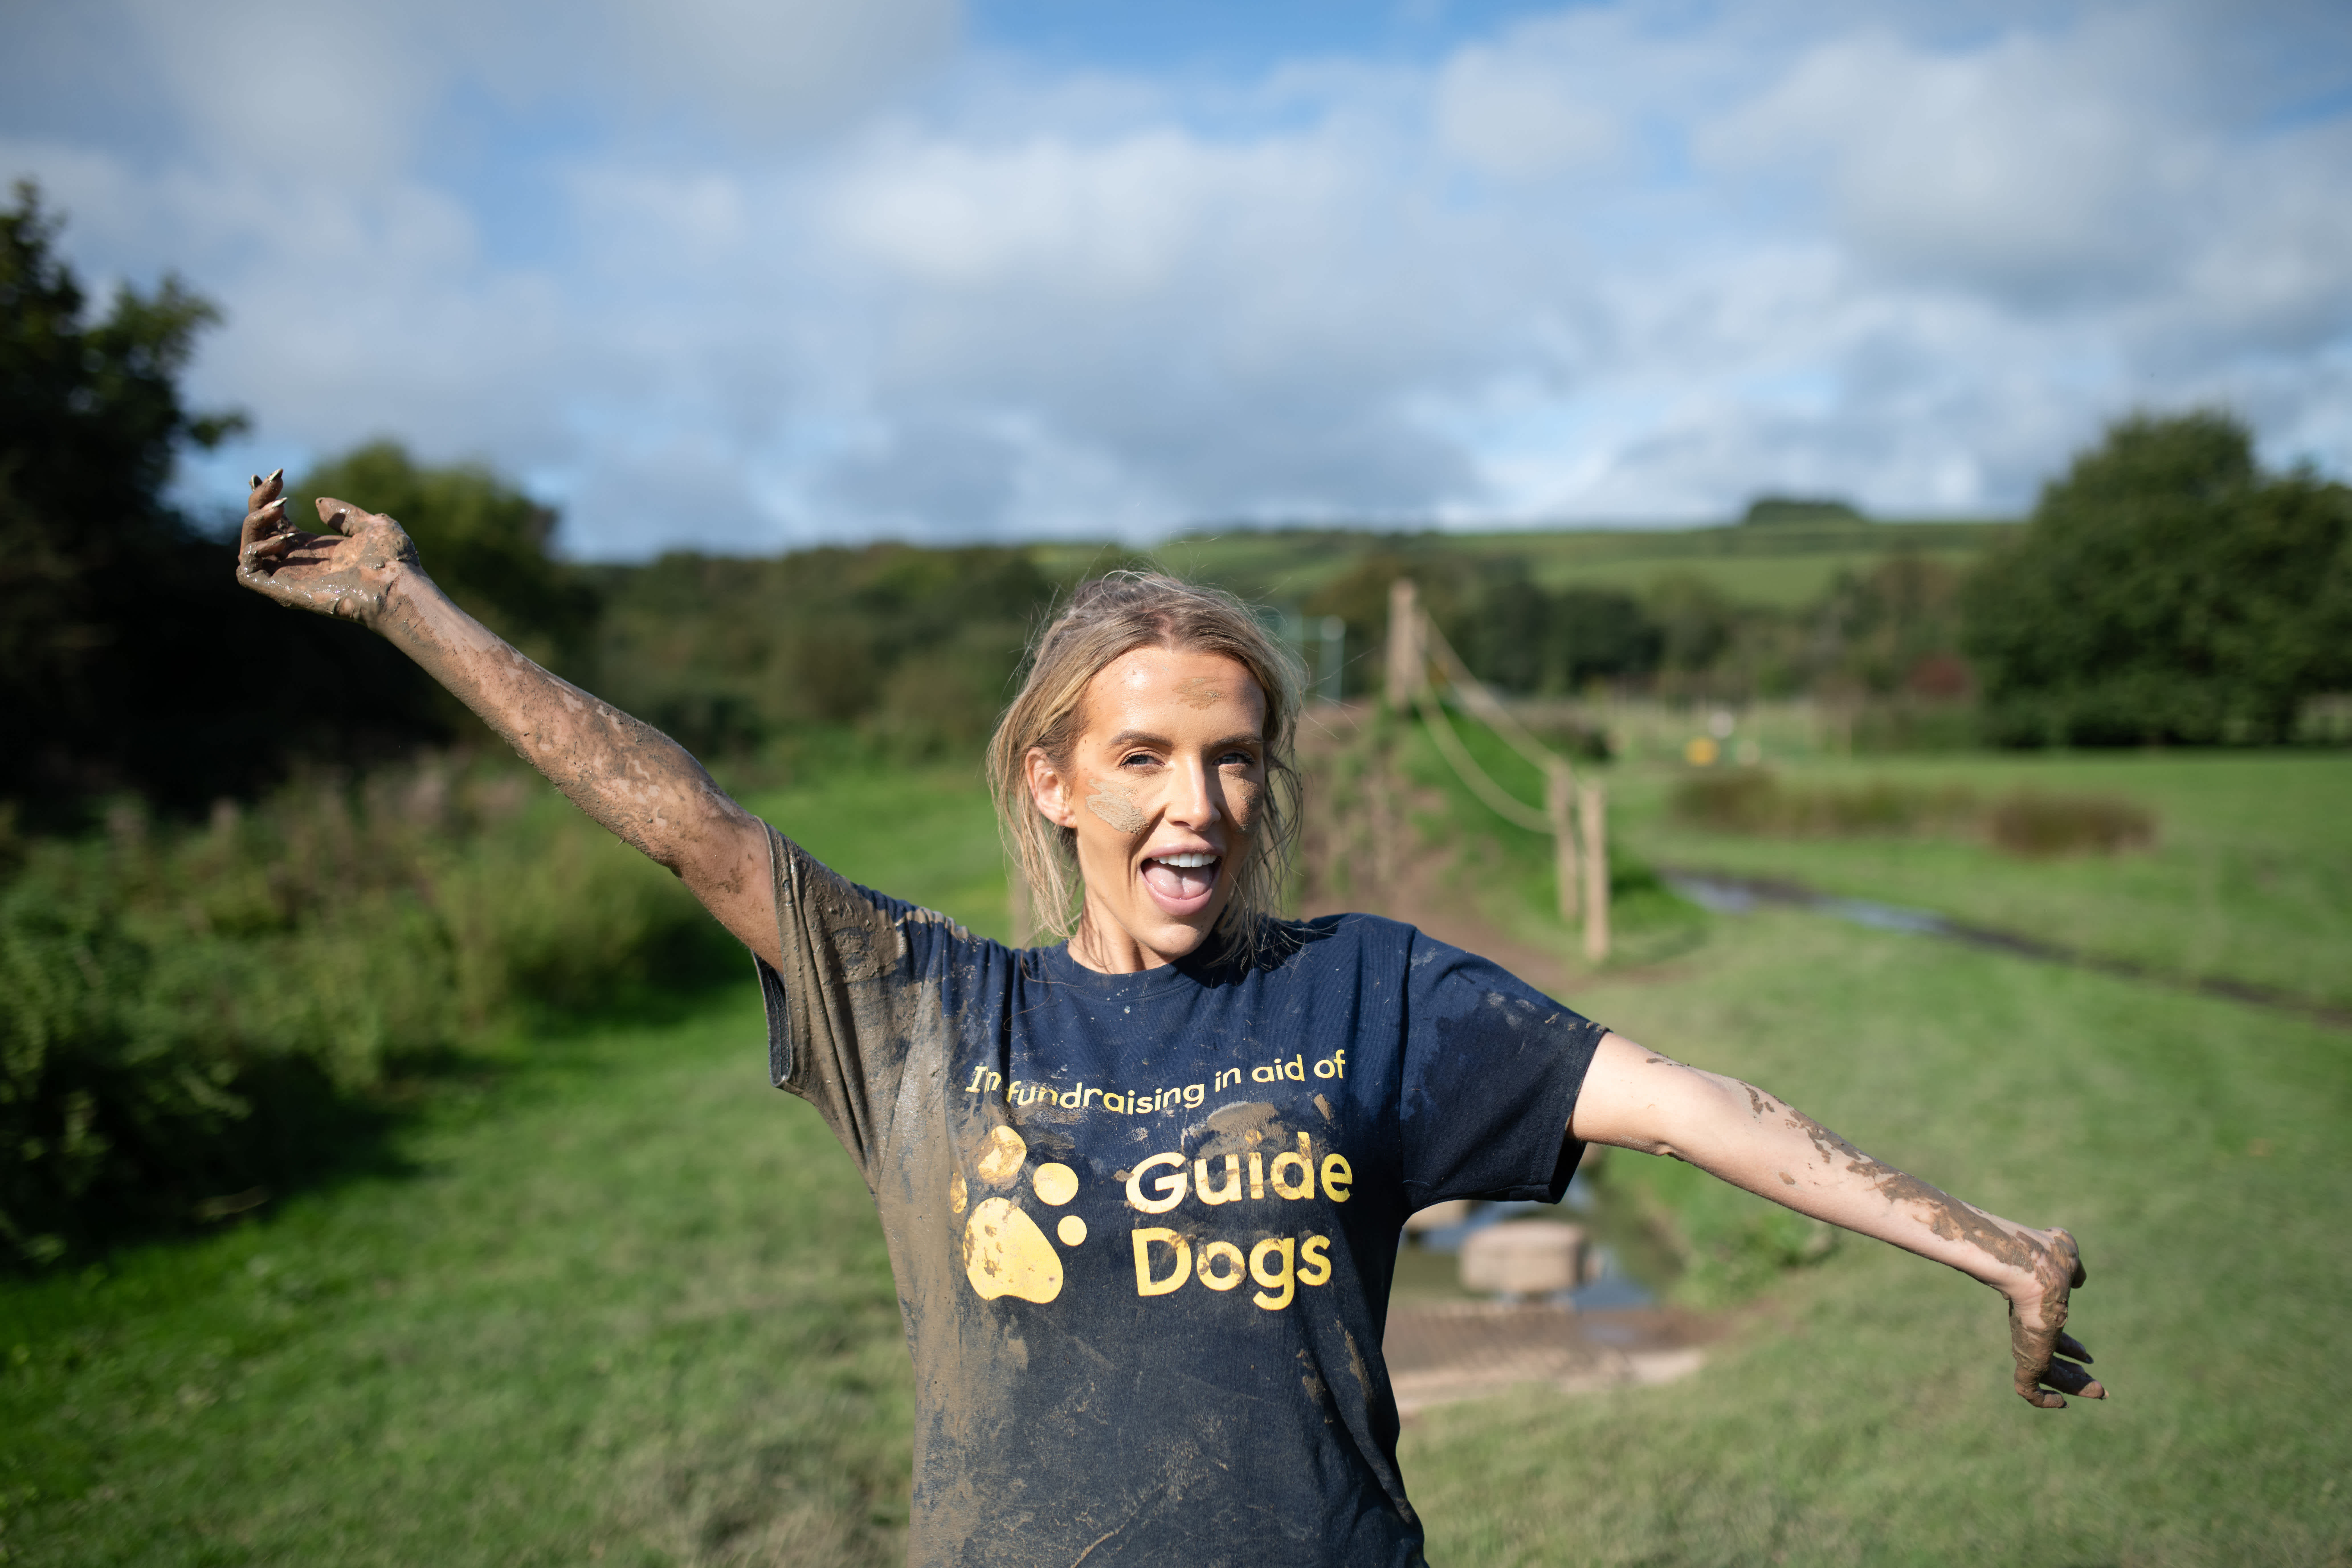 Faye Winter stands in front of an outdoor assault course. She is covered in mud and wearing her Guide Dogs t-shirt as she smiles towards the camera and holds her arms out. 